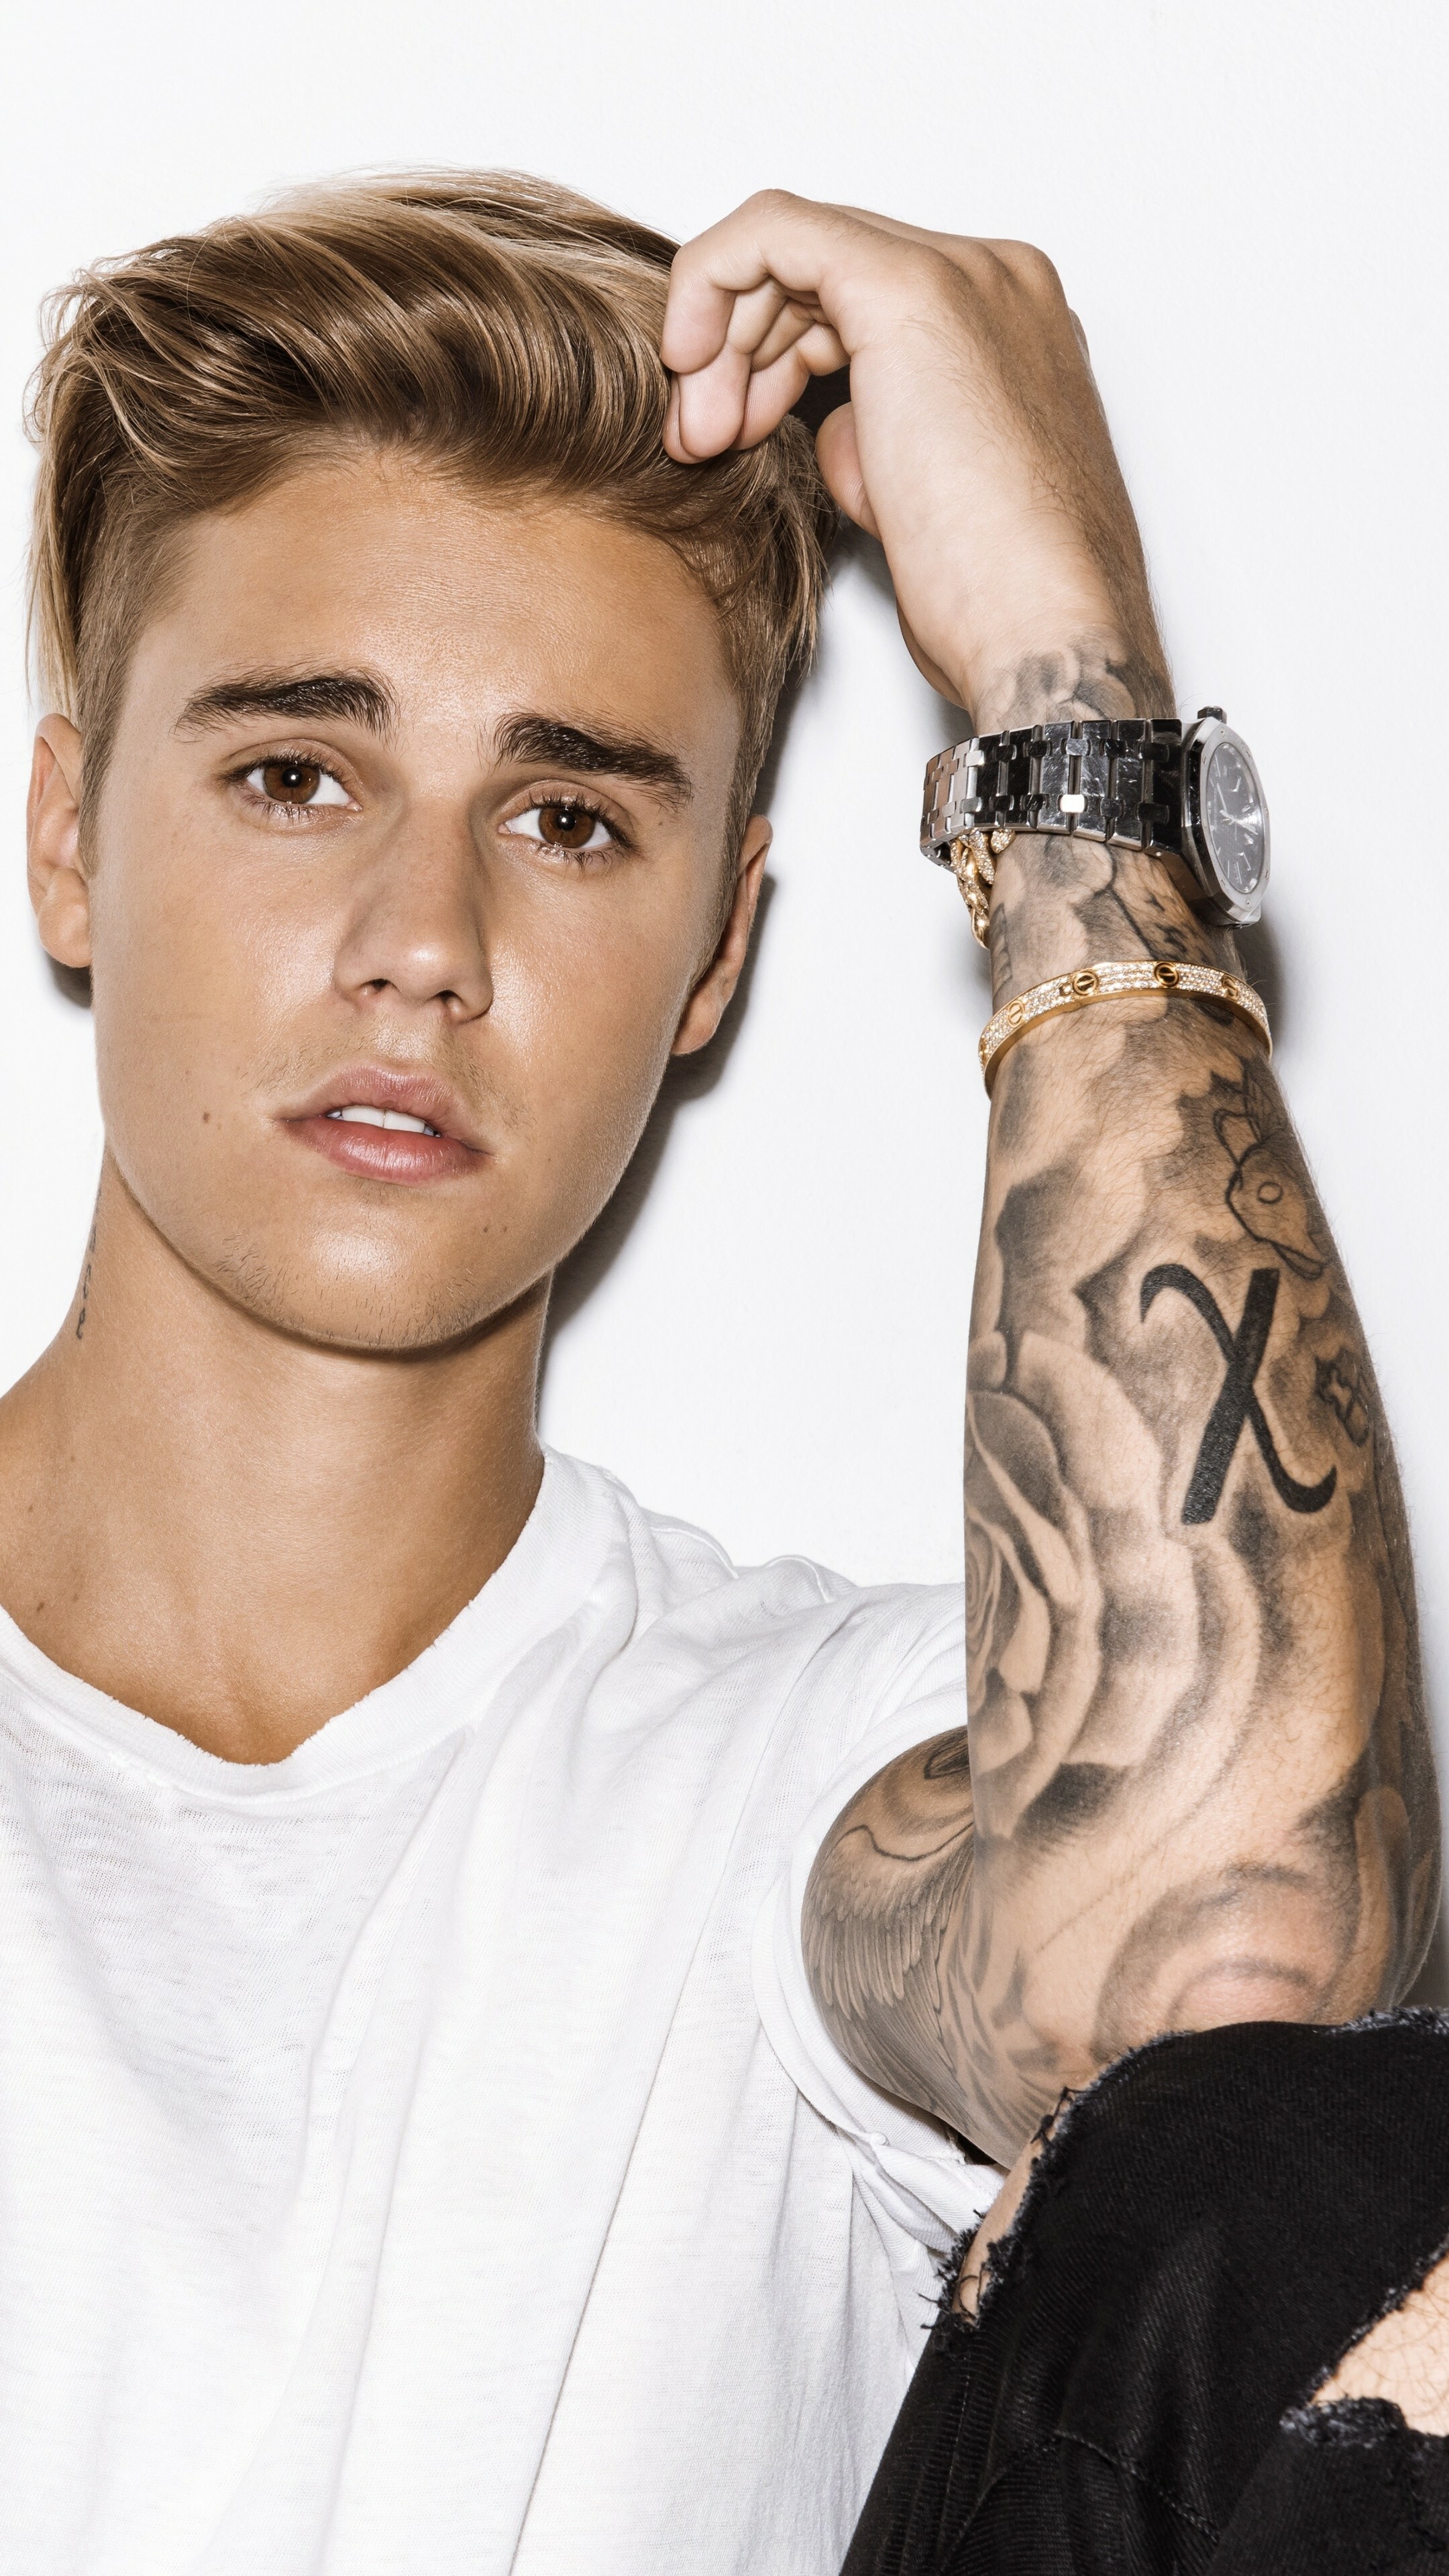 Justin Bieber: Canadian singer and teen idol, Debut seven-track EP My World (2009). 2160x3840 4K Background.